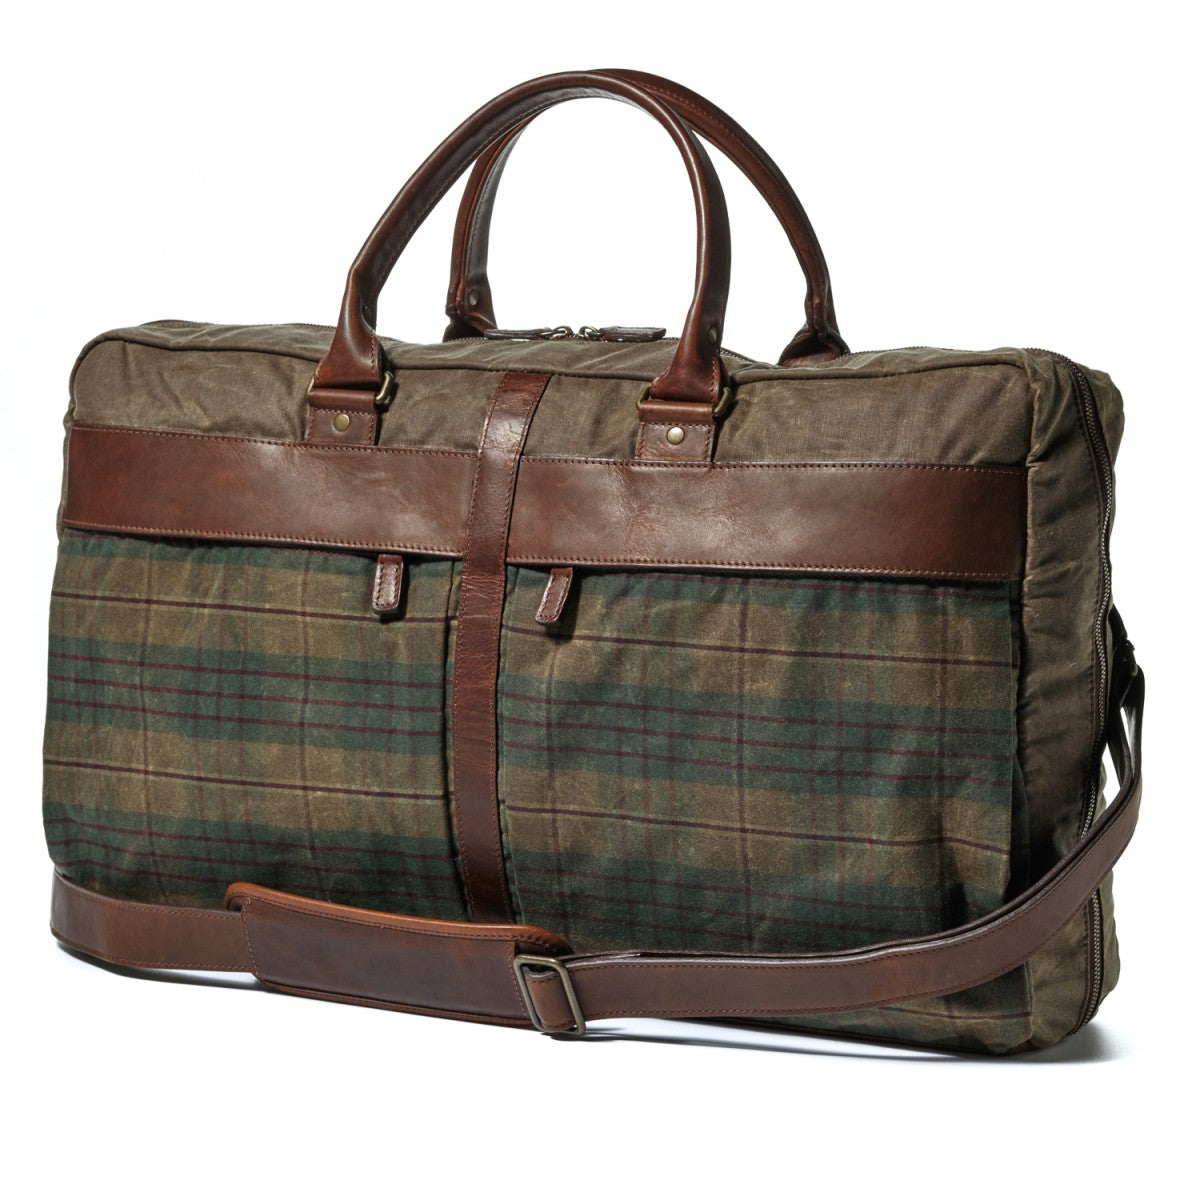 Moore and Giles Tinsley Trifold Carry On, Waxwear Autumn Plaid and Baldwin Oak